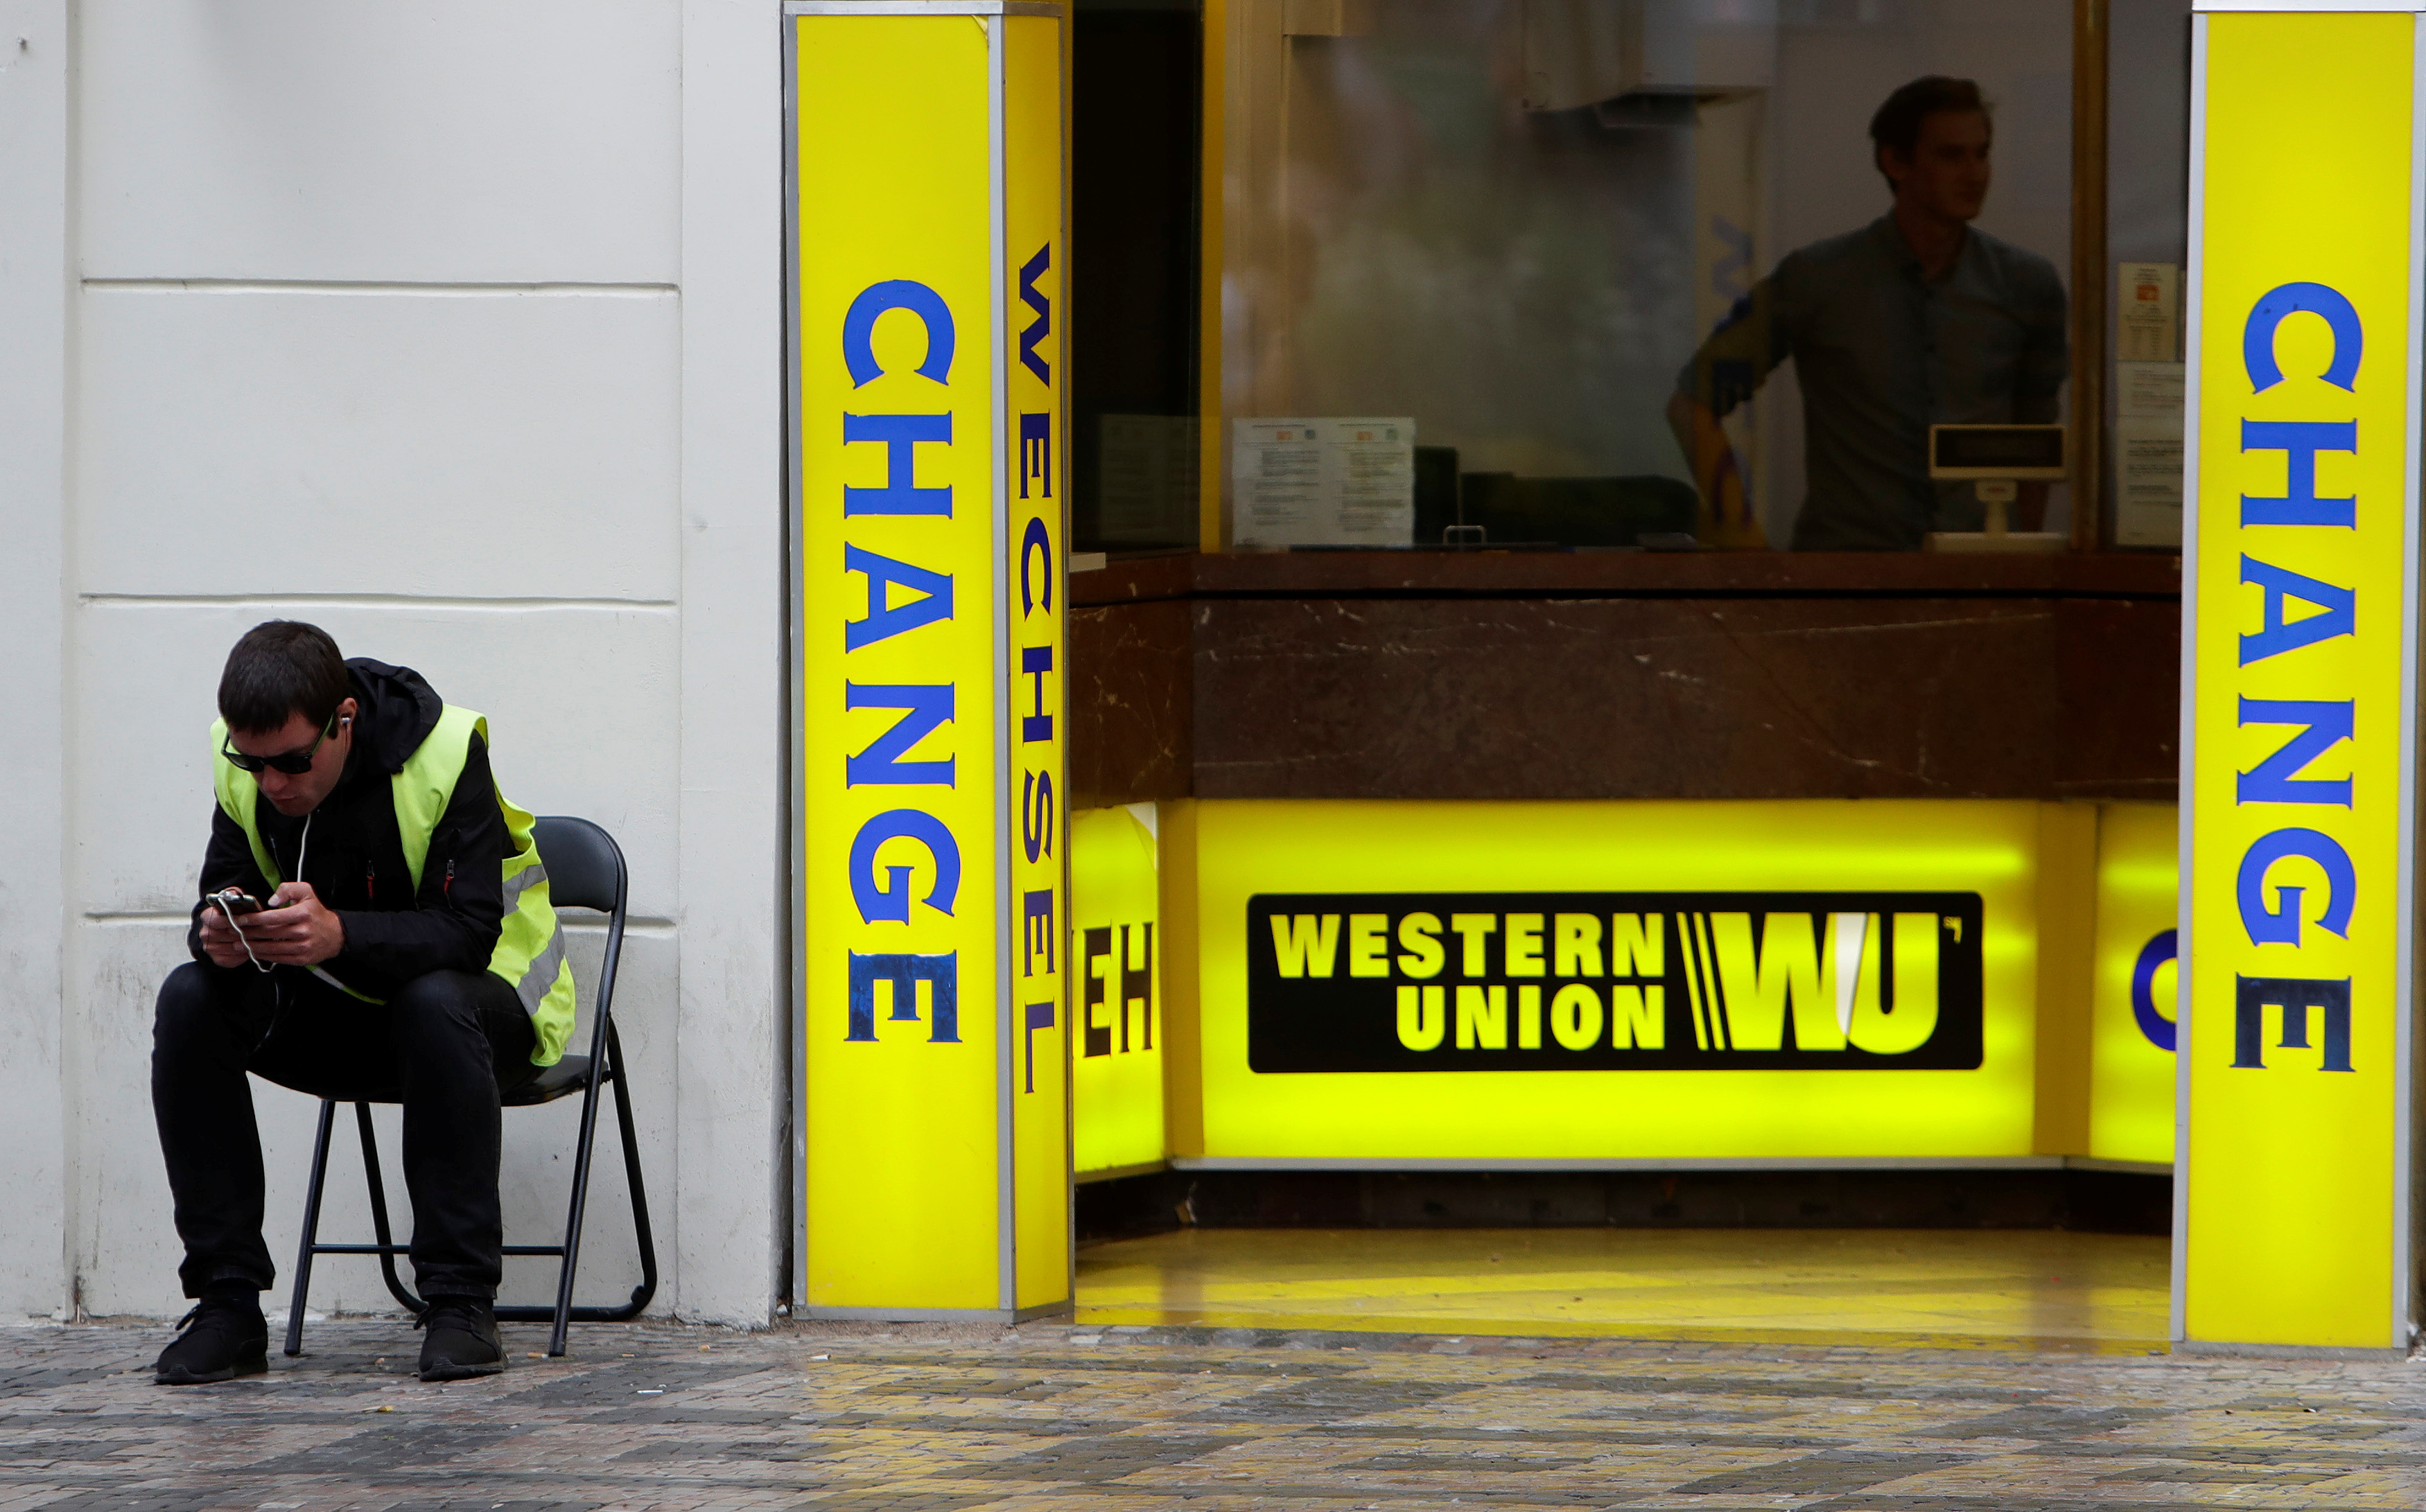 Western Union Near Me Western Union raises annual profit view on strong growth in C2C service |  Reuters